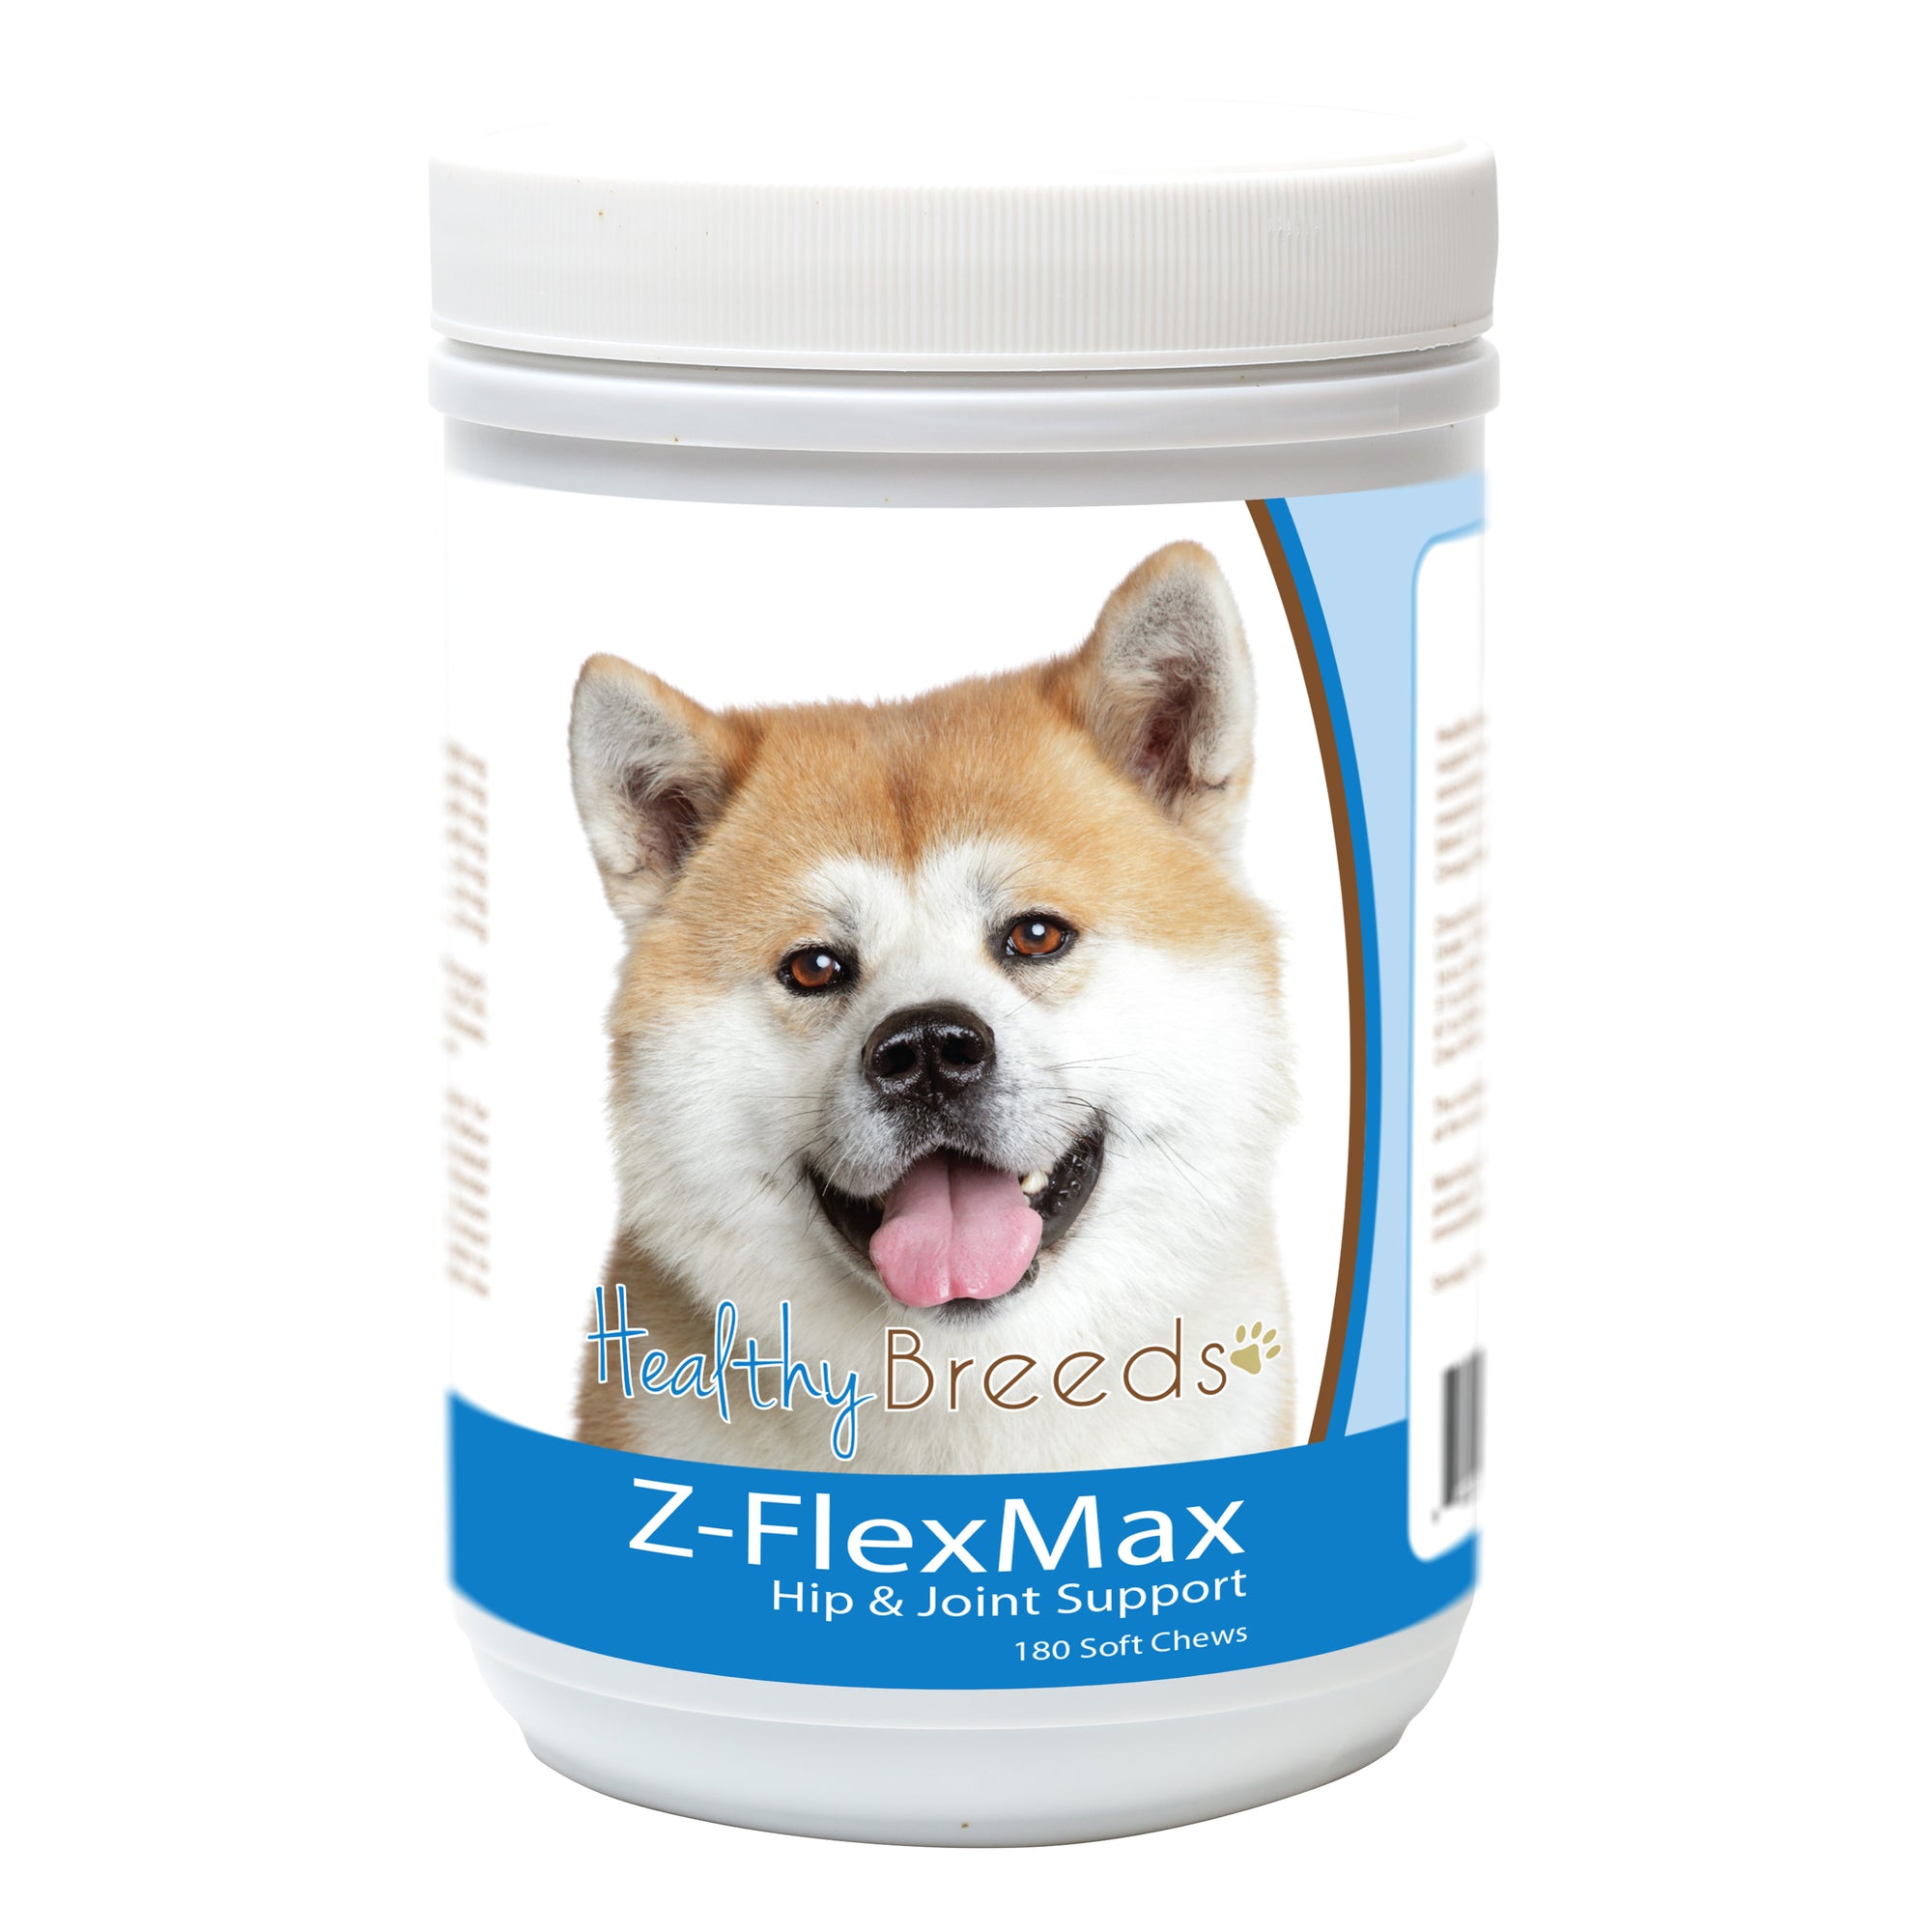 Healthy Breeds Akita Z-Flex Max Dog Hip and Joint Support 180 Count